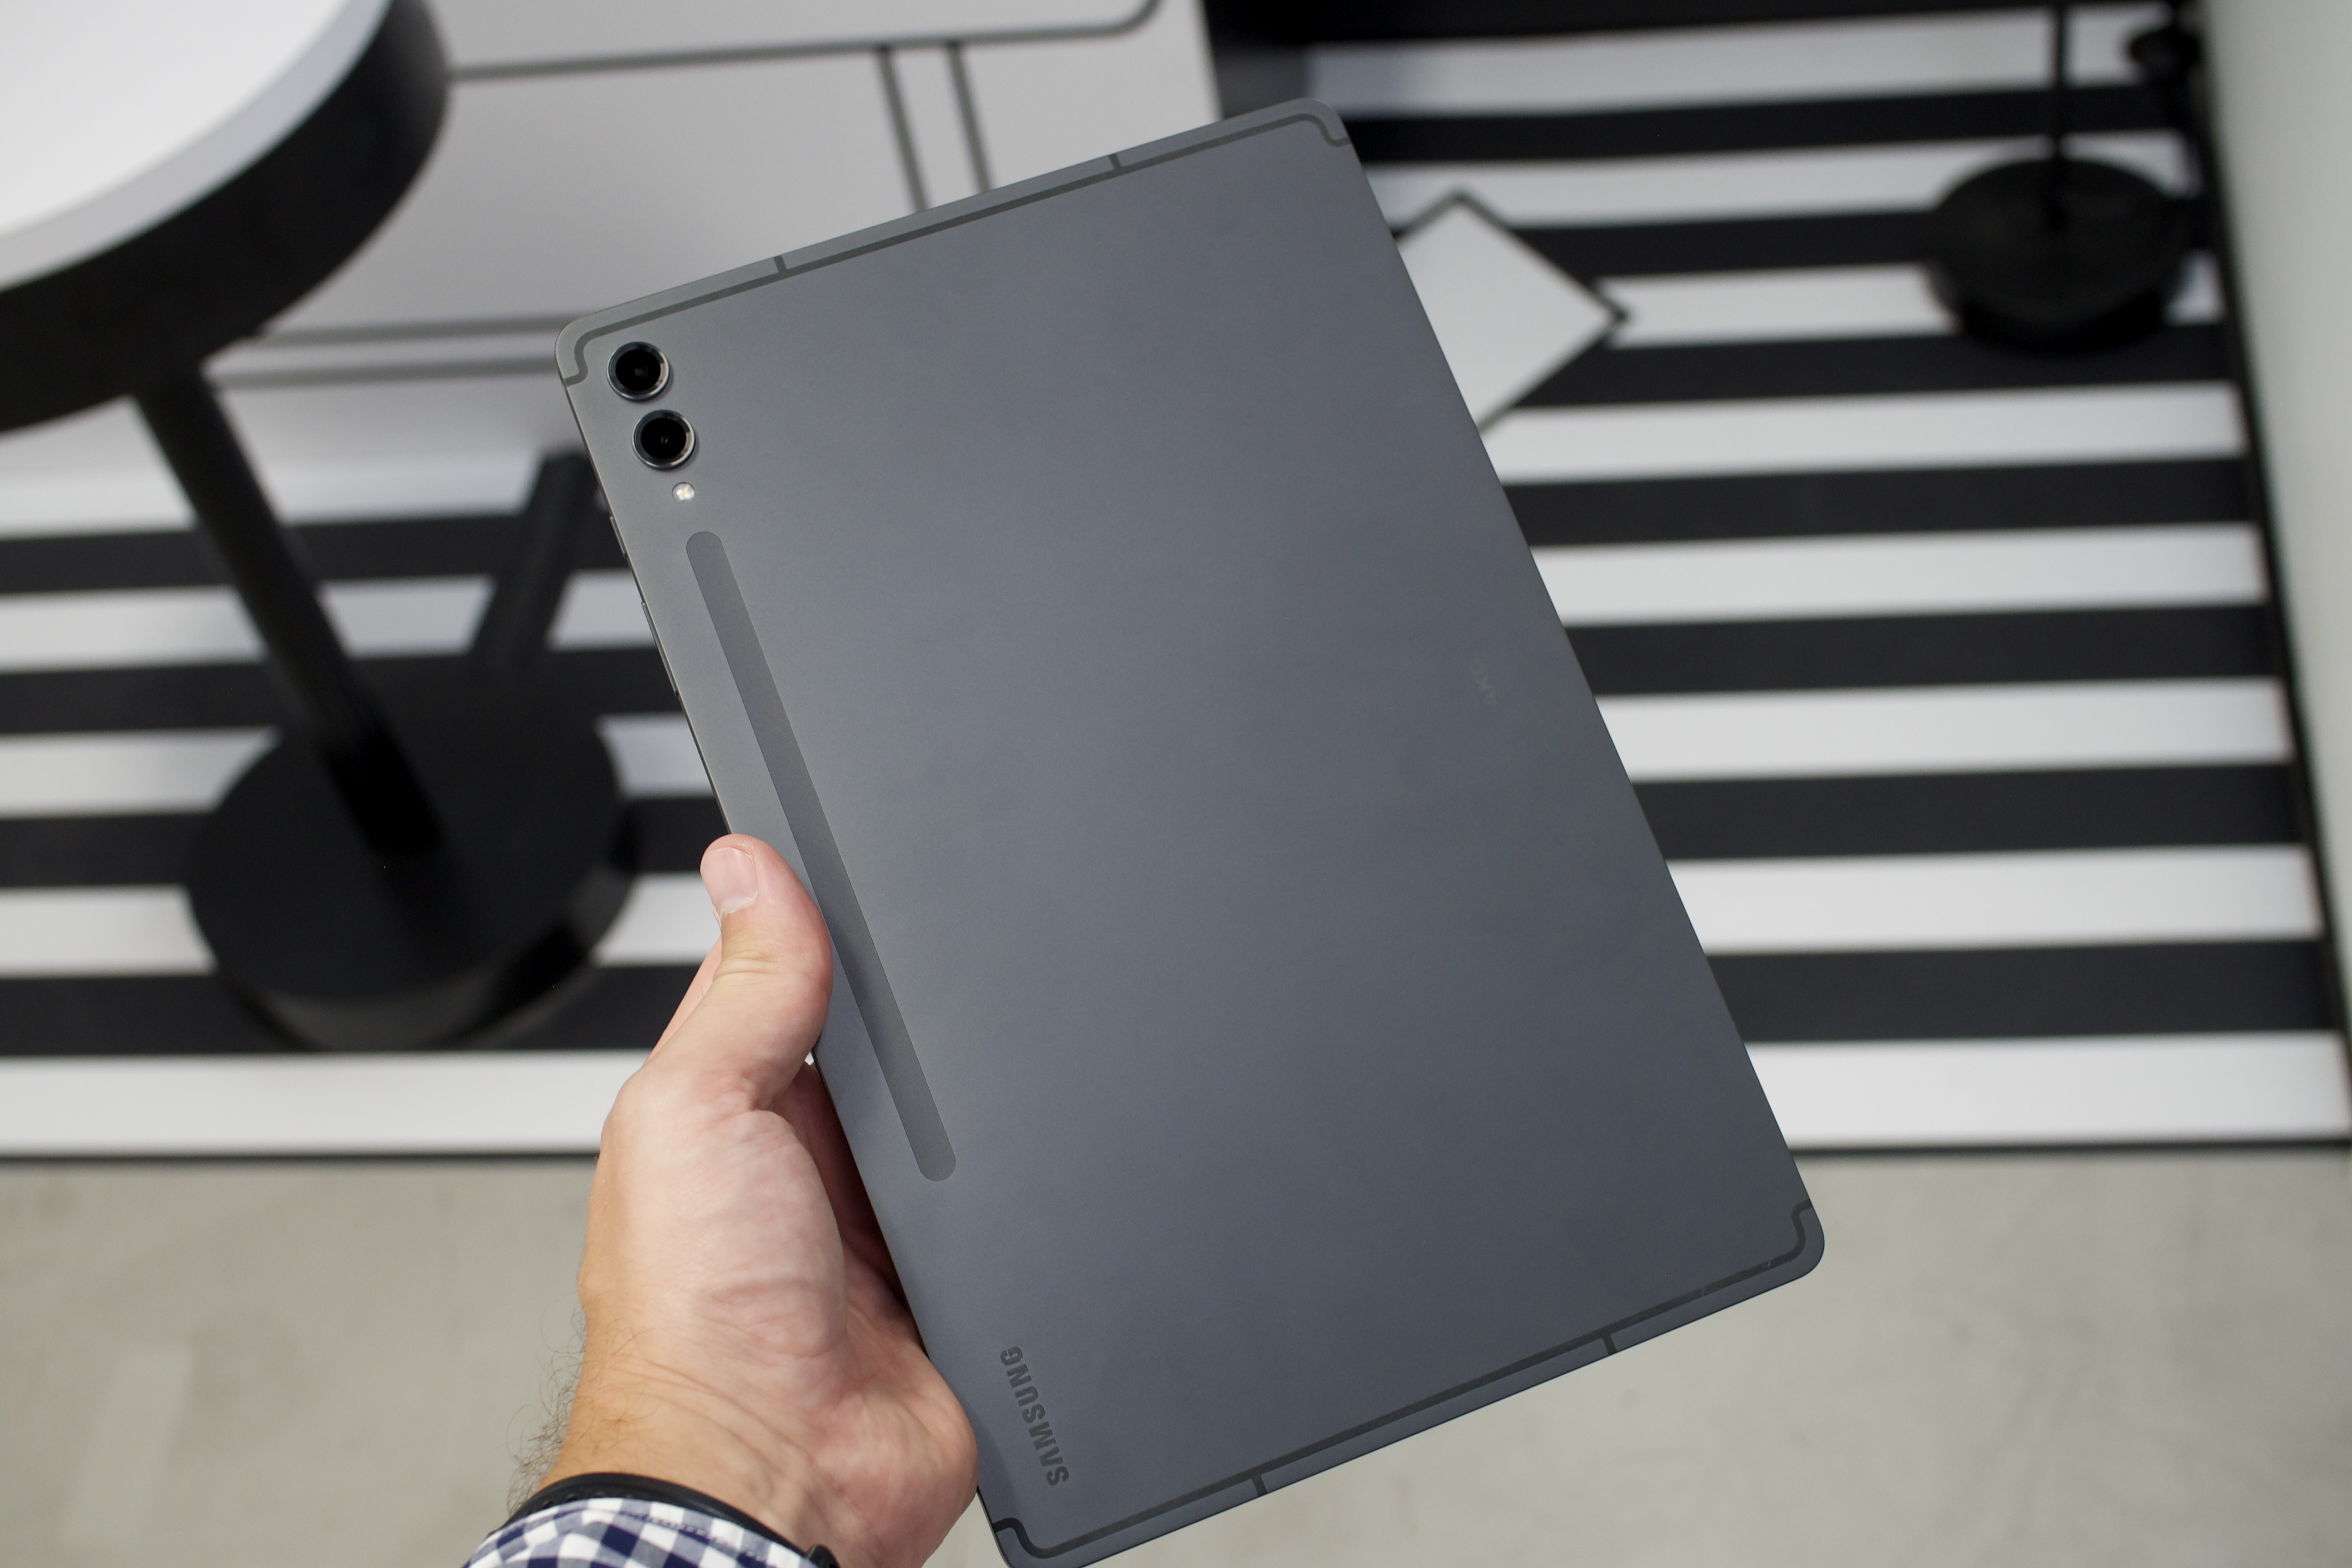 Samsung Galaxy Tab S9 price, release date, specs and more